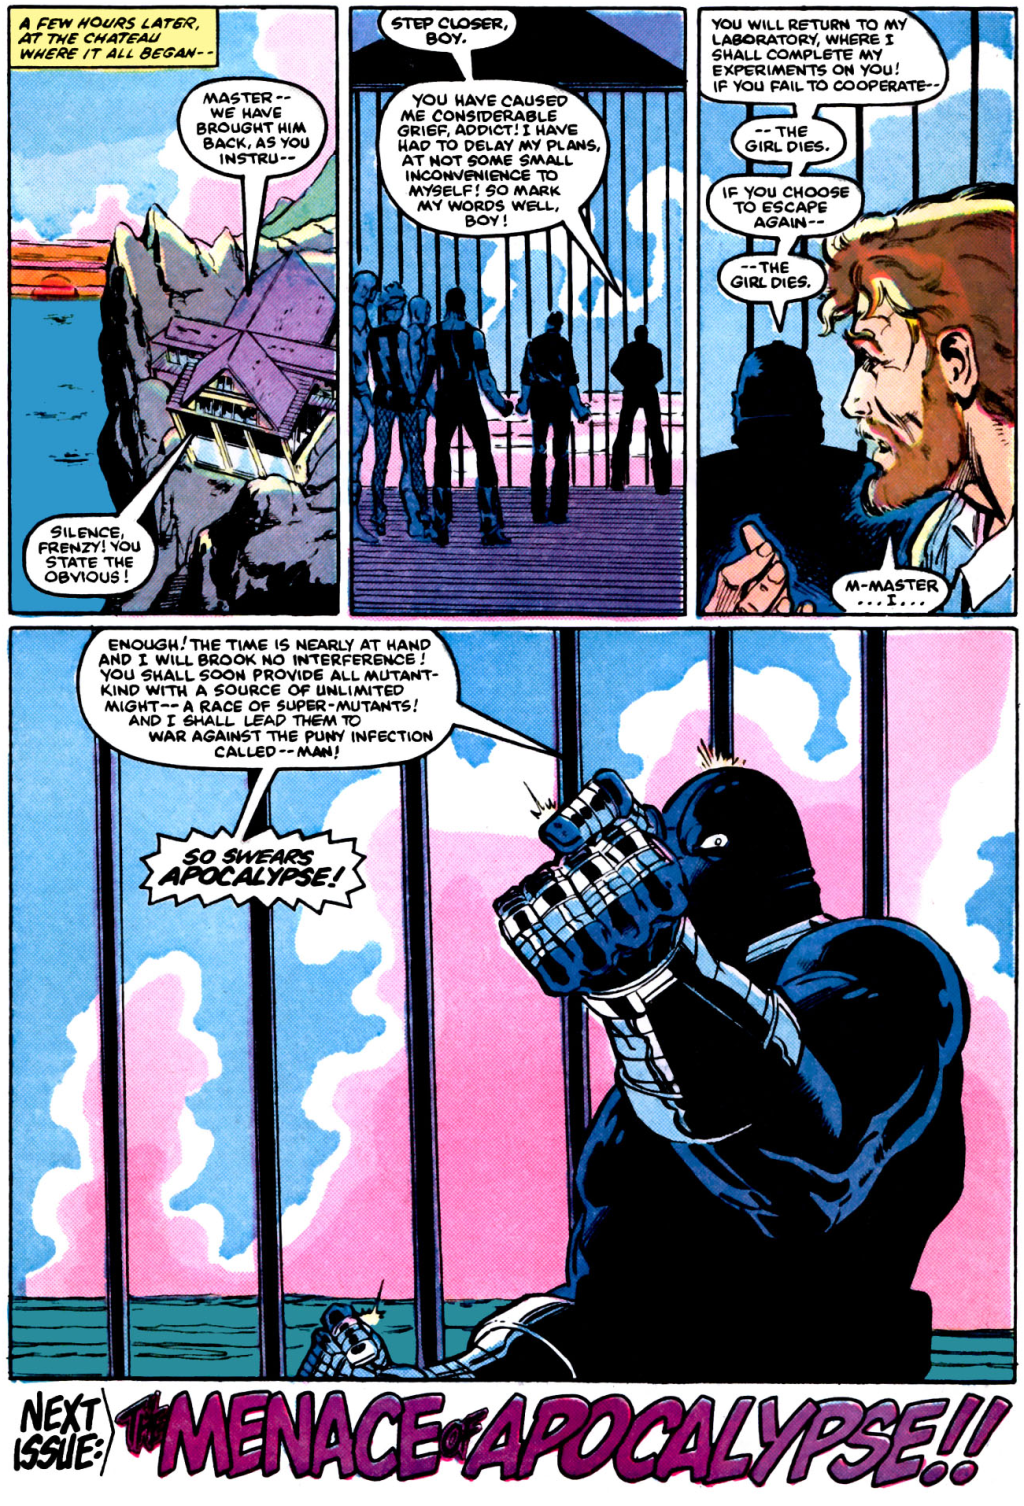 Apocalypse makes his comic book debut in X-Factor Vol. 1 #5 "Tapped Out" (1986), Marvel Comics. Words by Bob Layton, art by Jackson Guice, Josef Rubinstein, Petra Scotese, and Joe Rosen.